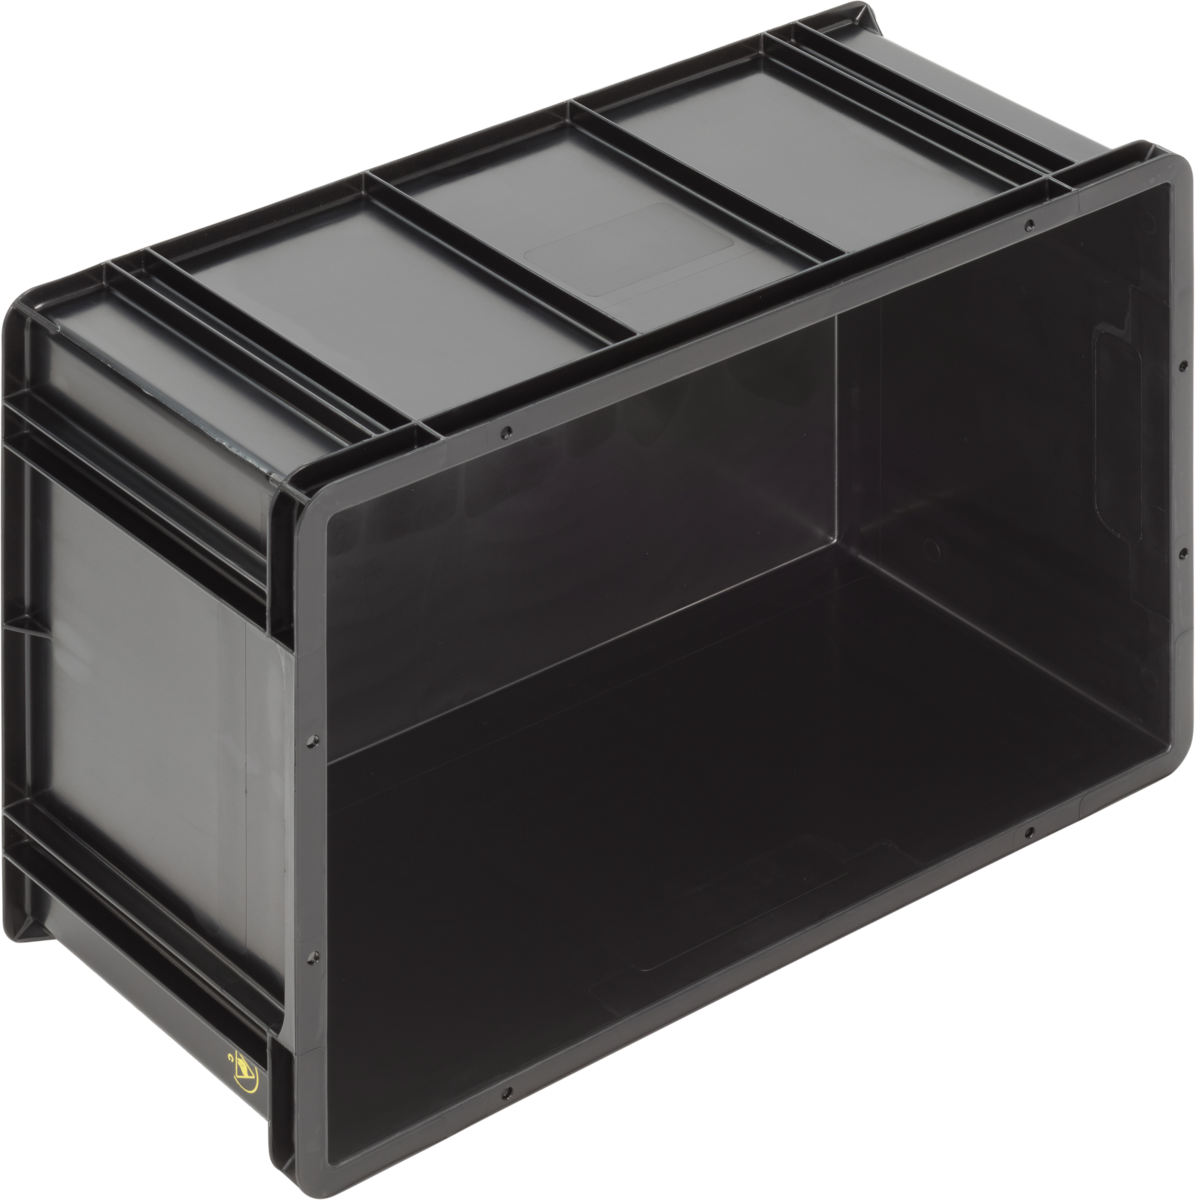 ESD-Safe-SGL-Norm-Stacking-Bin-Containers-Flat-Base-Ref.-6426.007.992_1004507_600x400x278_03